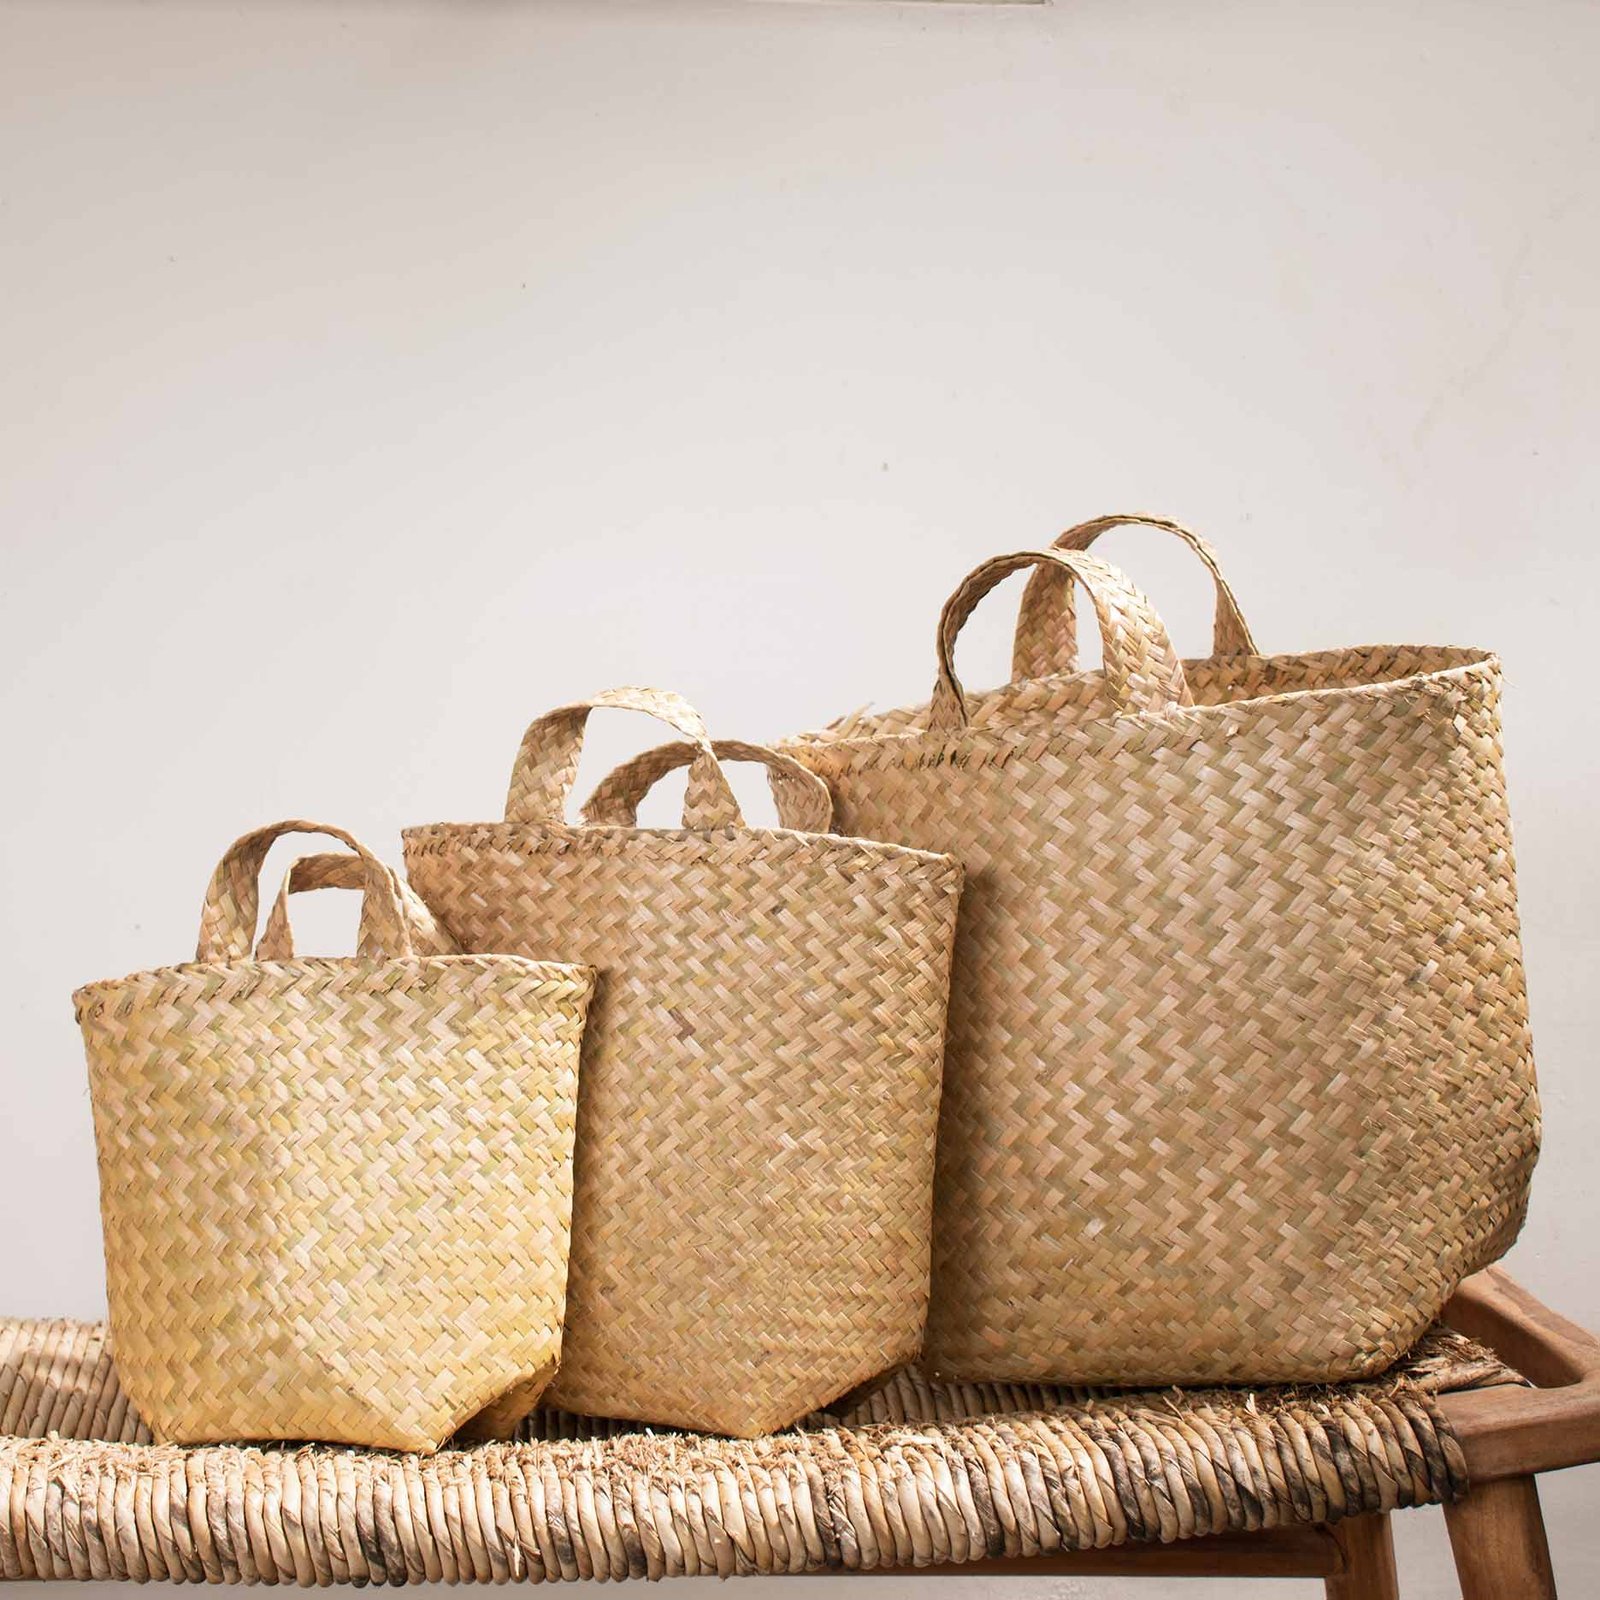 Bags Complete Collection - Bali Direct Free Delivery to your doorstep